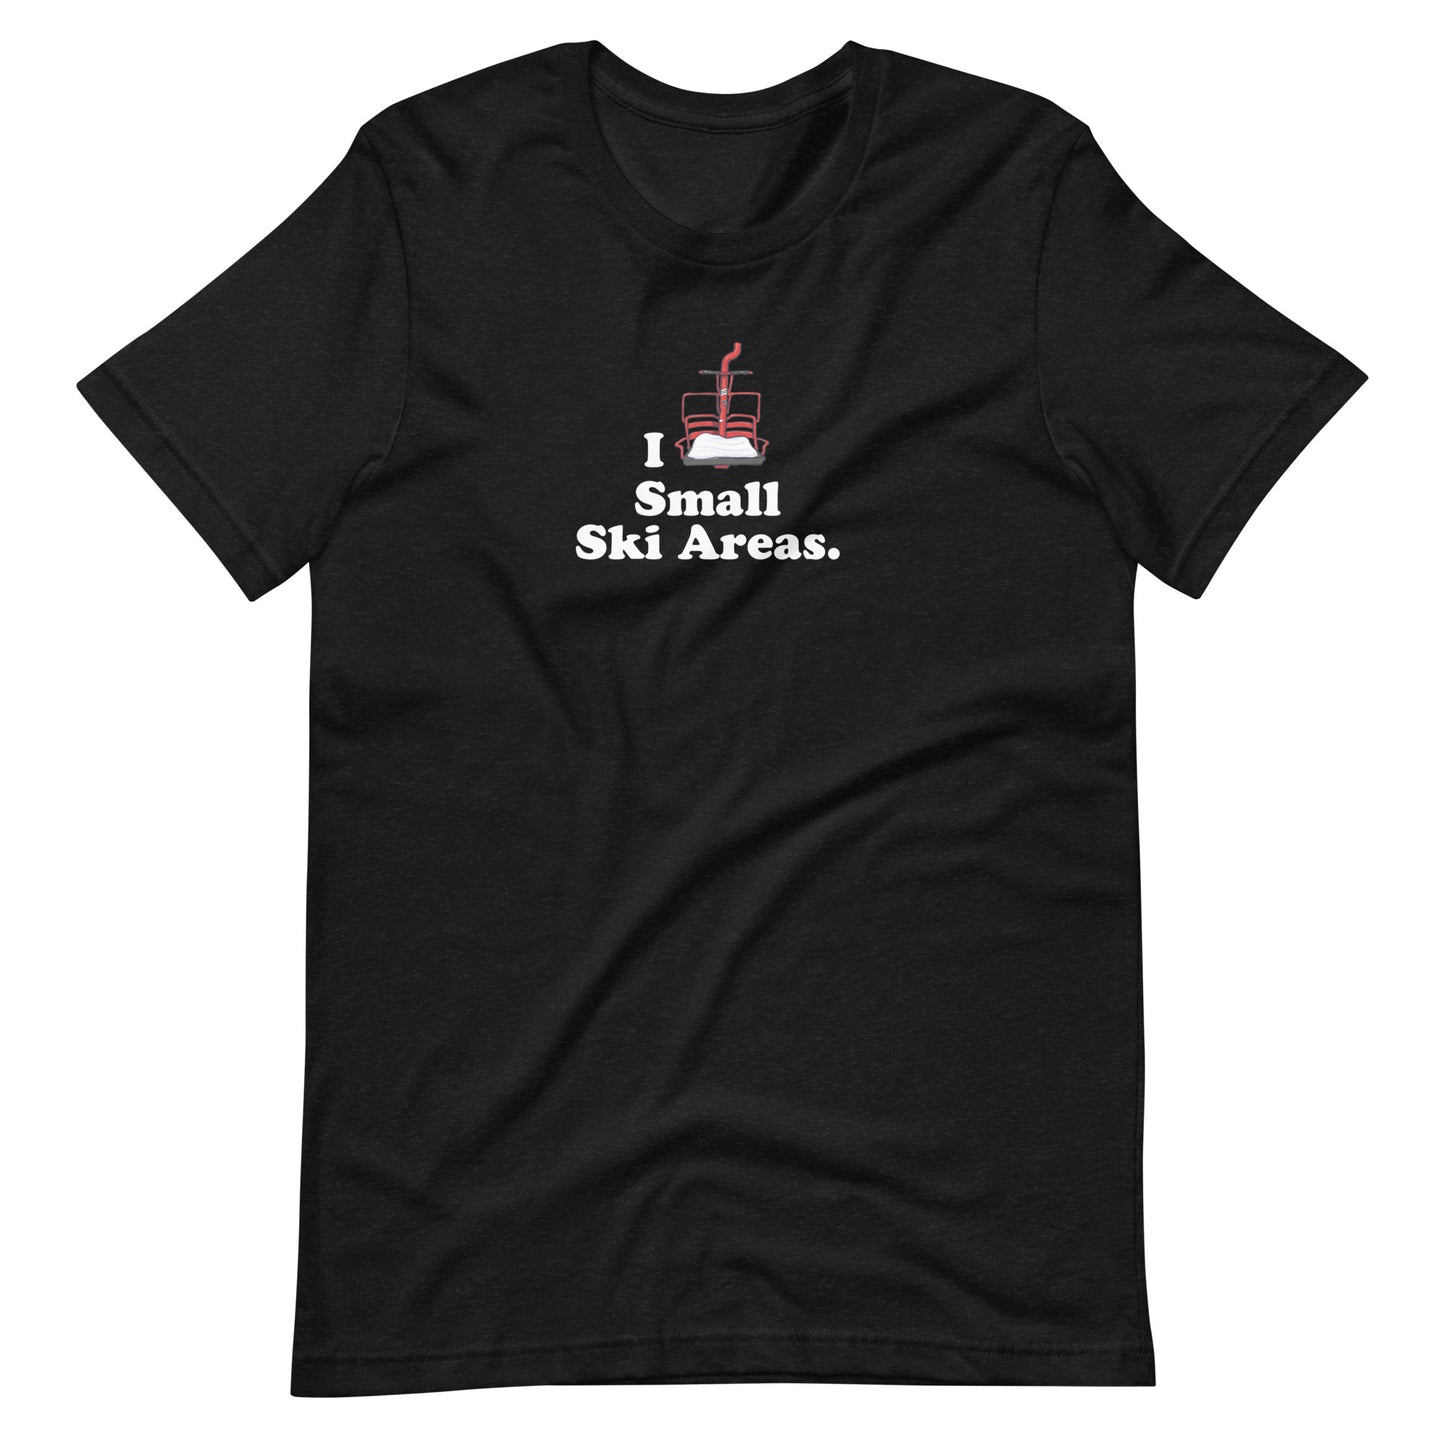 Front of Black Unisex Short-Sleeve Cotton T-Shirt with text I Love Small Ski Areas